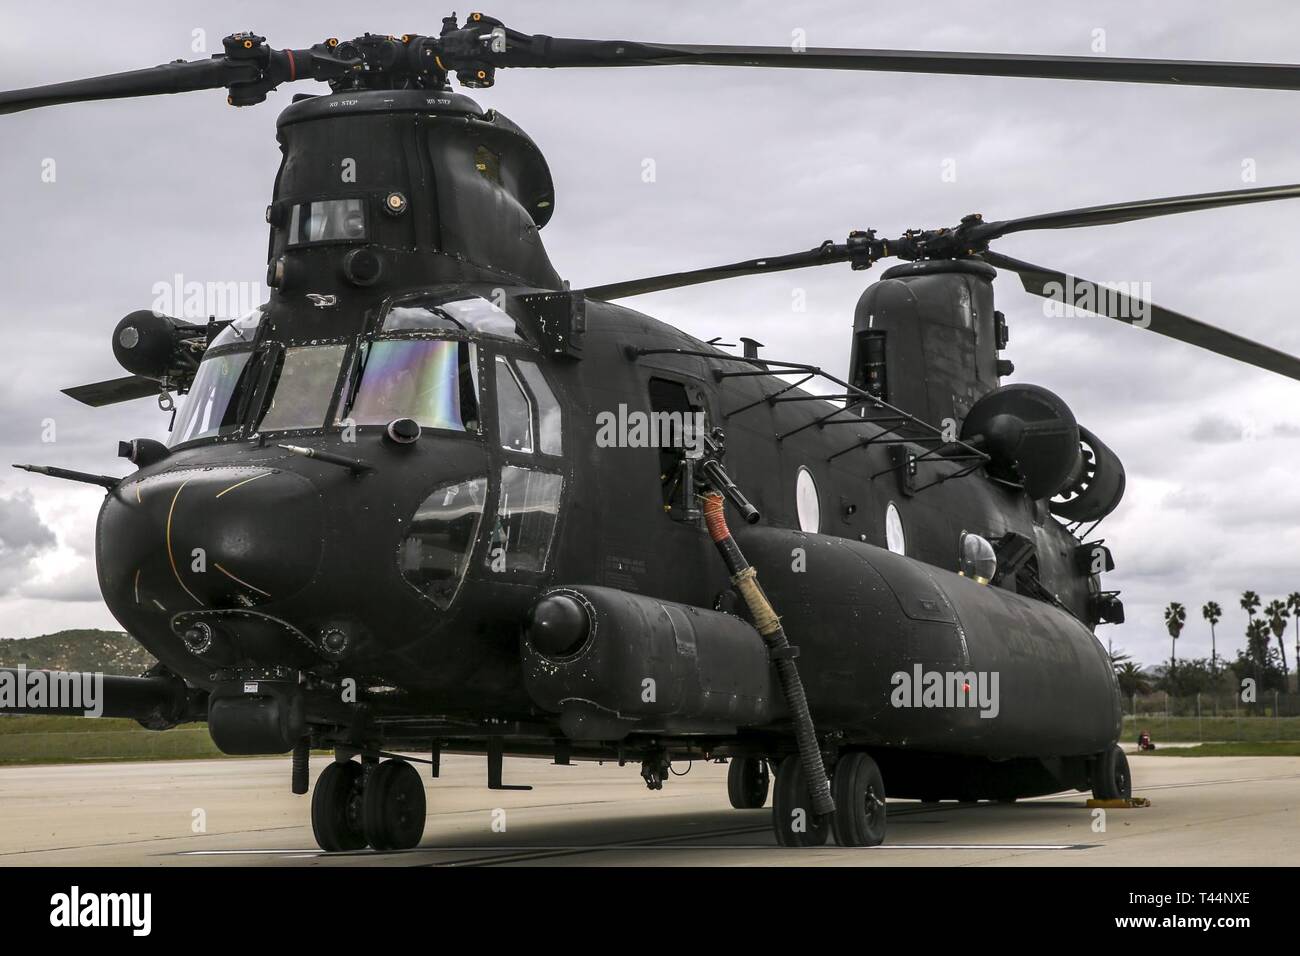 U.S. Army MH-47 Chinooks with the 160th Special Operations Aviation Regiment (SOAR) land at Marine Corps Air Station (MCAS) Camp Pendleton, California, Feb. 20, 2019. Soldiers from the 160th SOAR were conducting joint operations at MCAS Camp Pendleton. Stock Photo